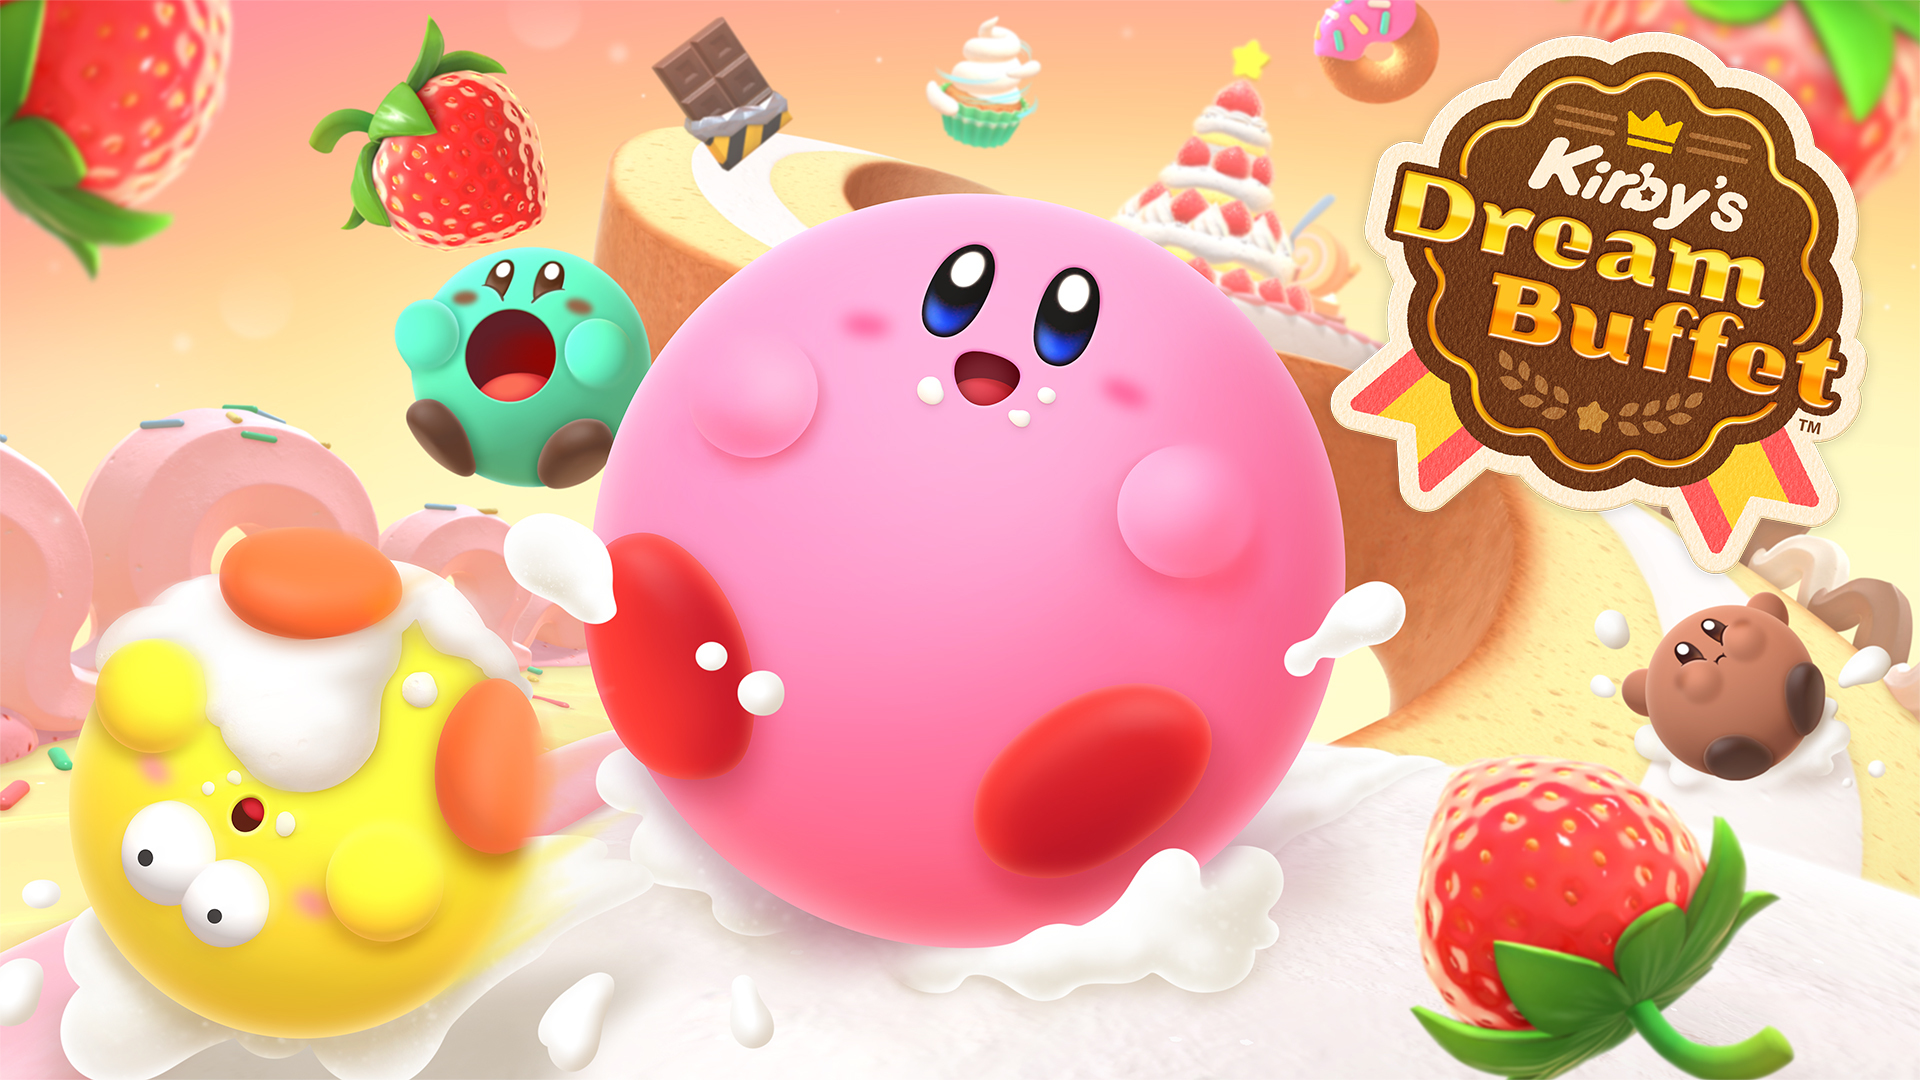 Every Kirby Game From The 2010s, Ranked By Metacritic